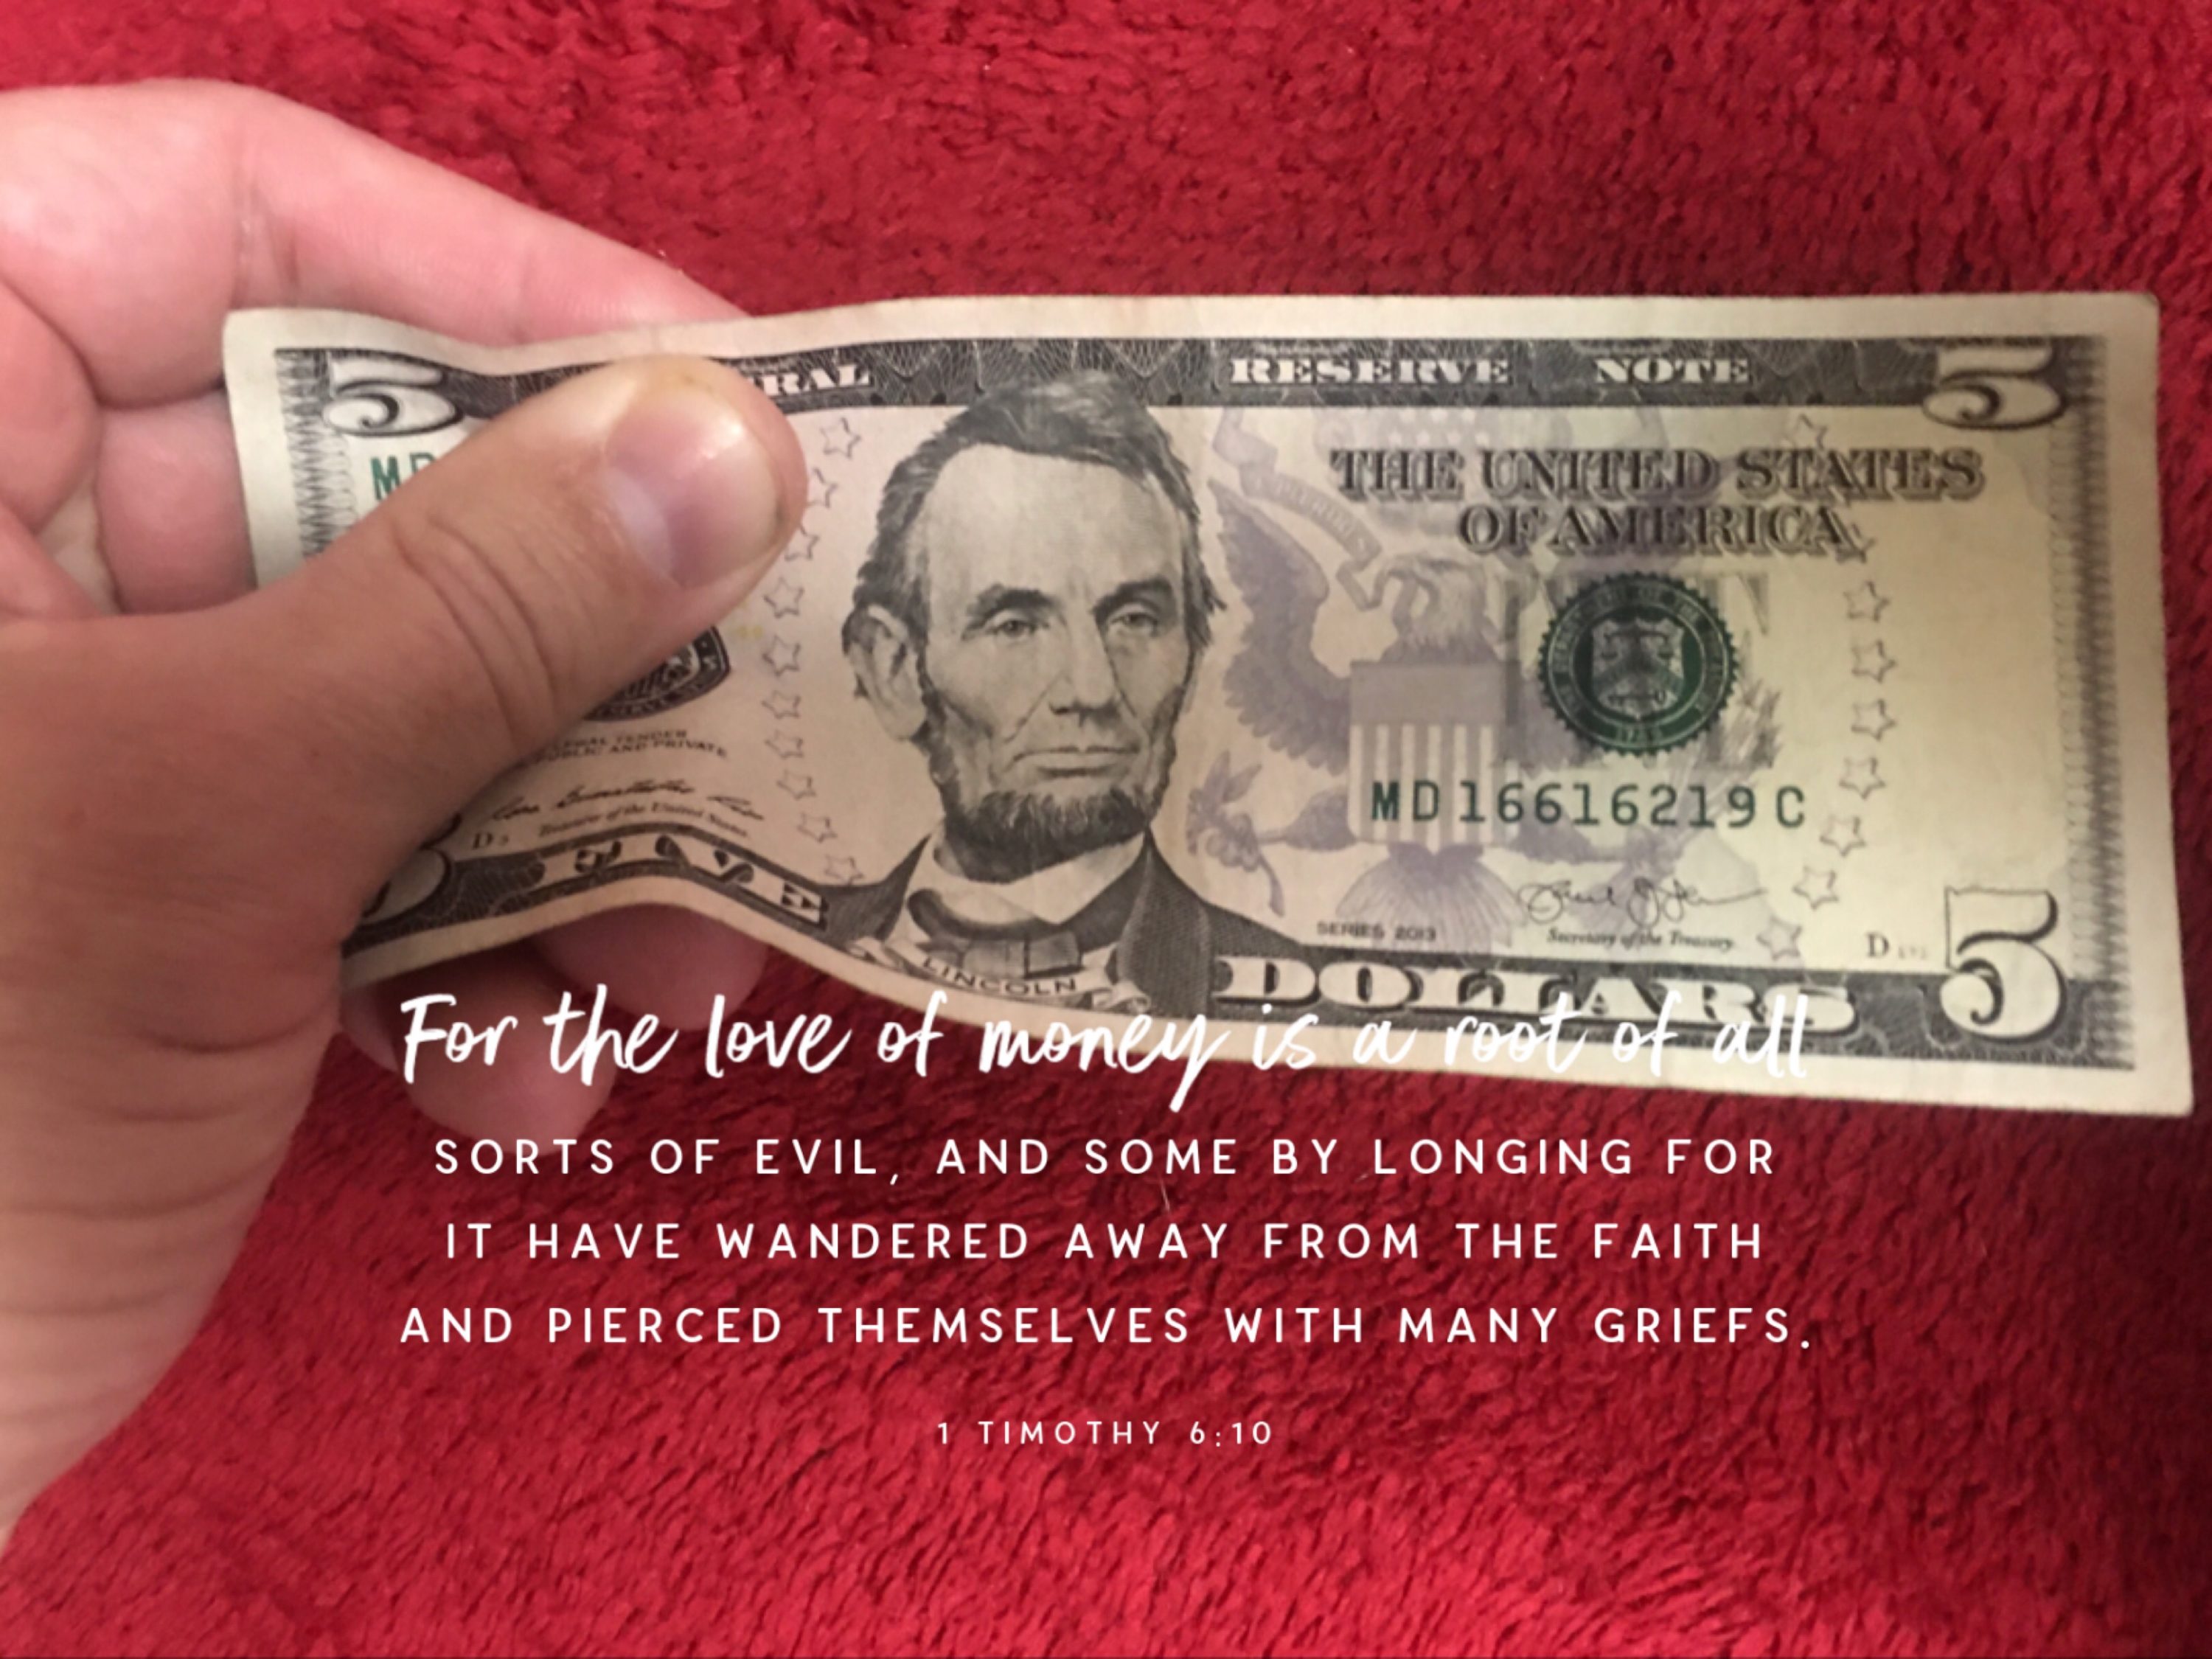 VOTD March 4 - “For the love of money is a root of all sorts of evil, and some by longing for it have wandered away from the faith and pierced themselves with many griefs.” ‭‭1 Timothy‬ ‭6:10‬ ‭NASB‬‬ #BibleLens